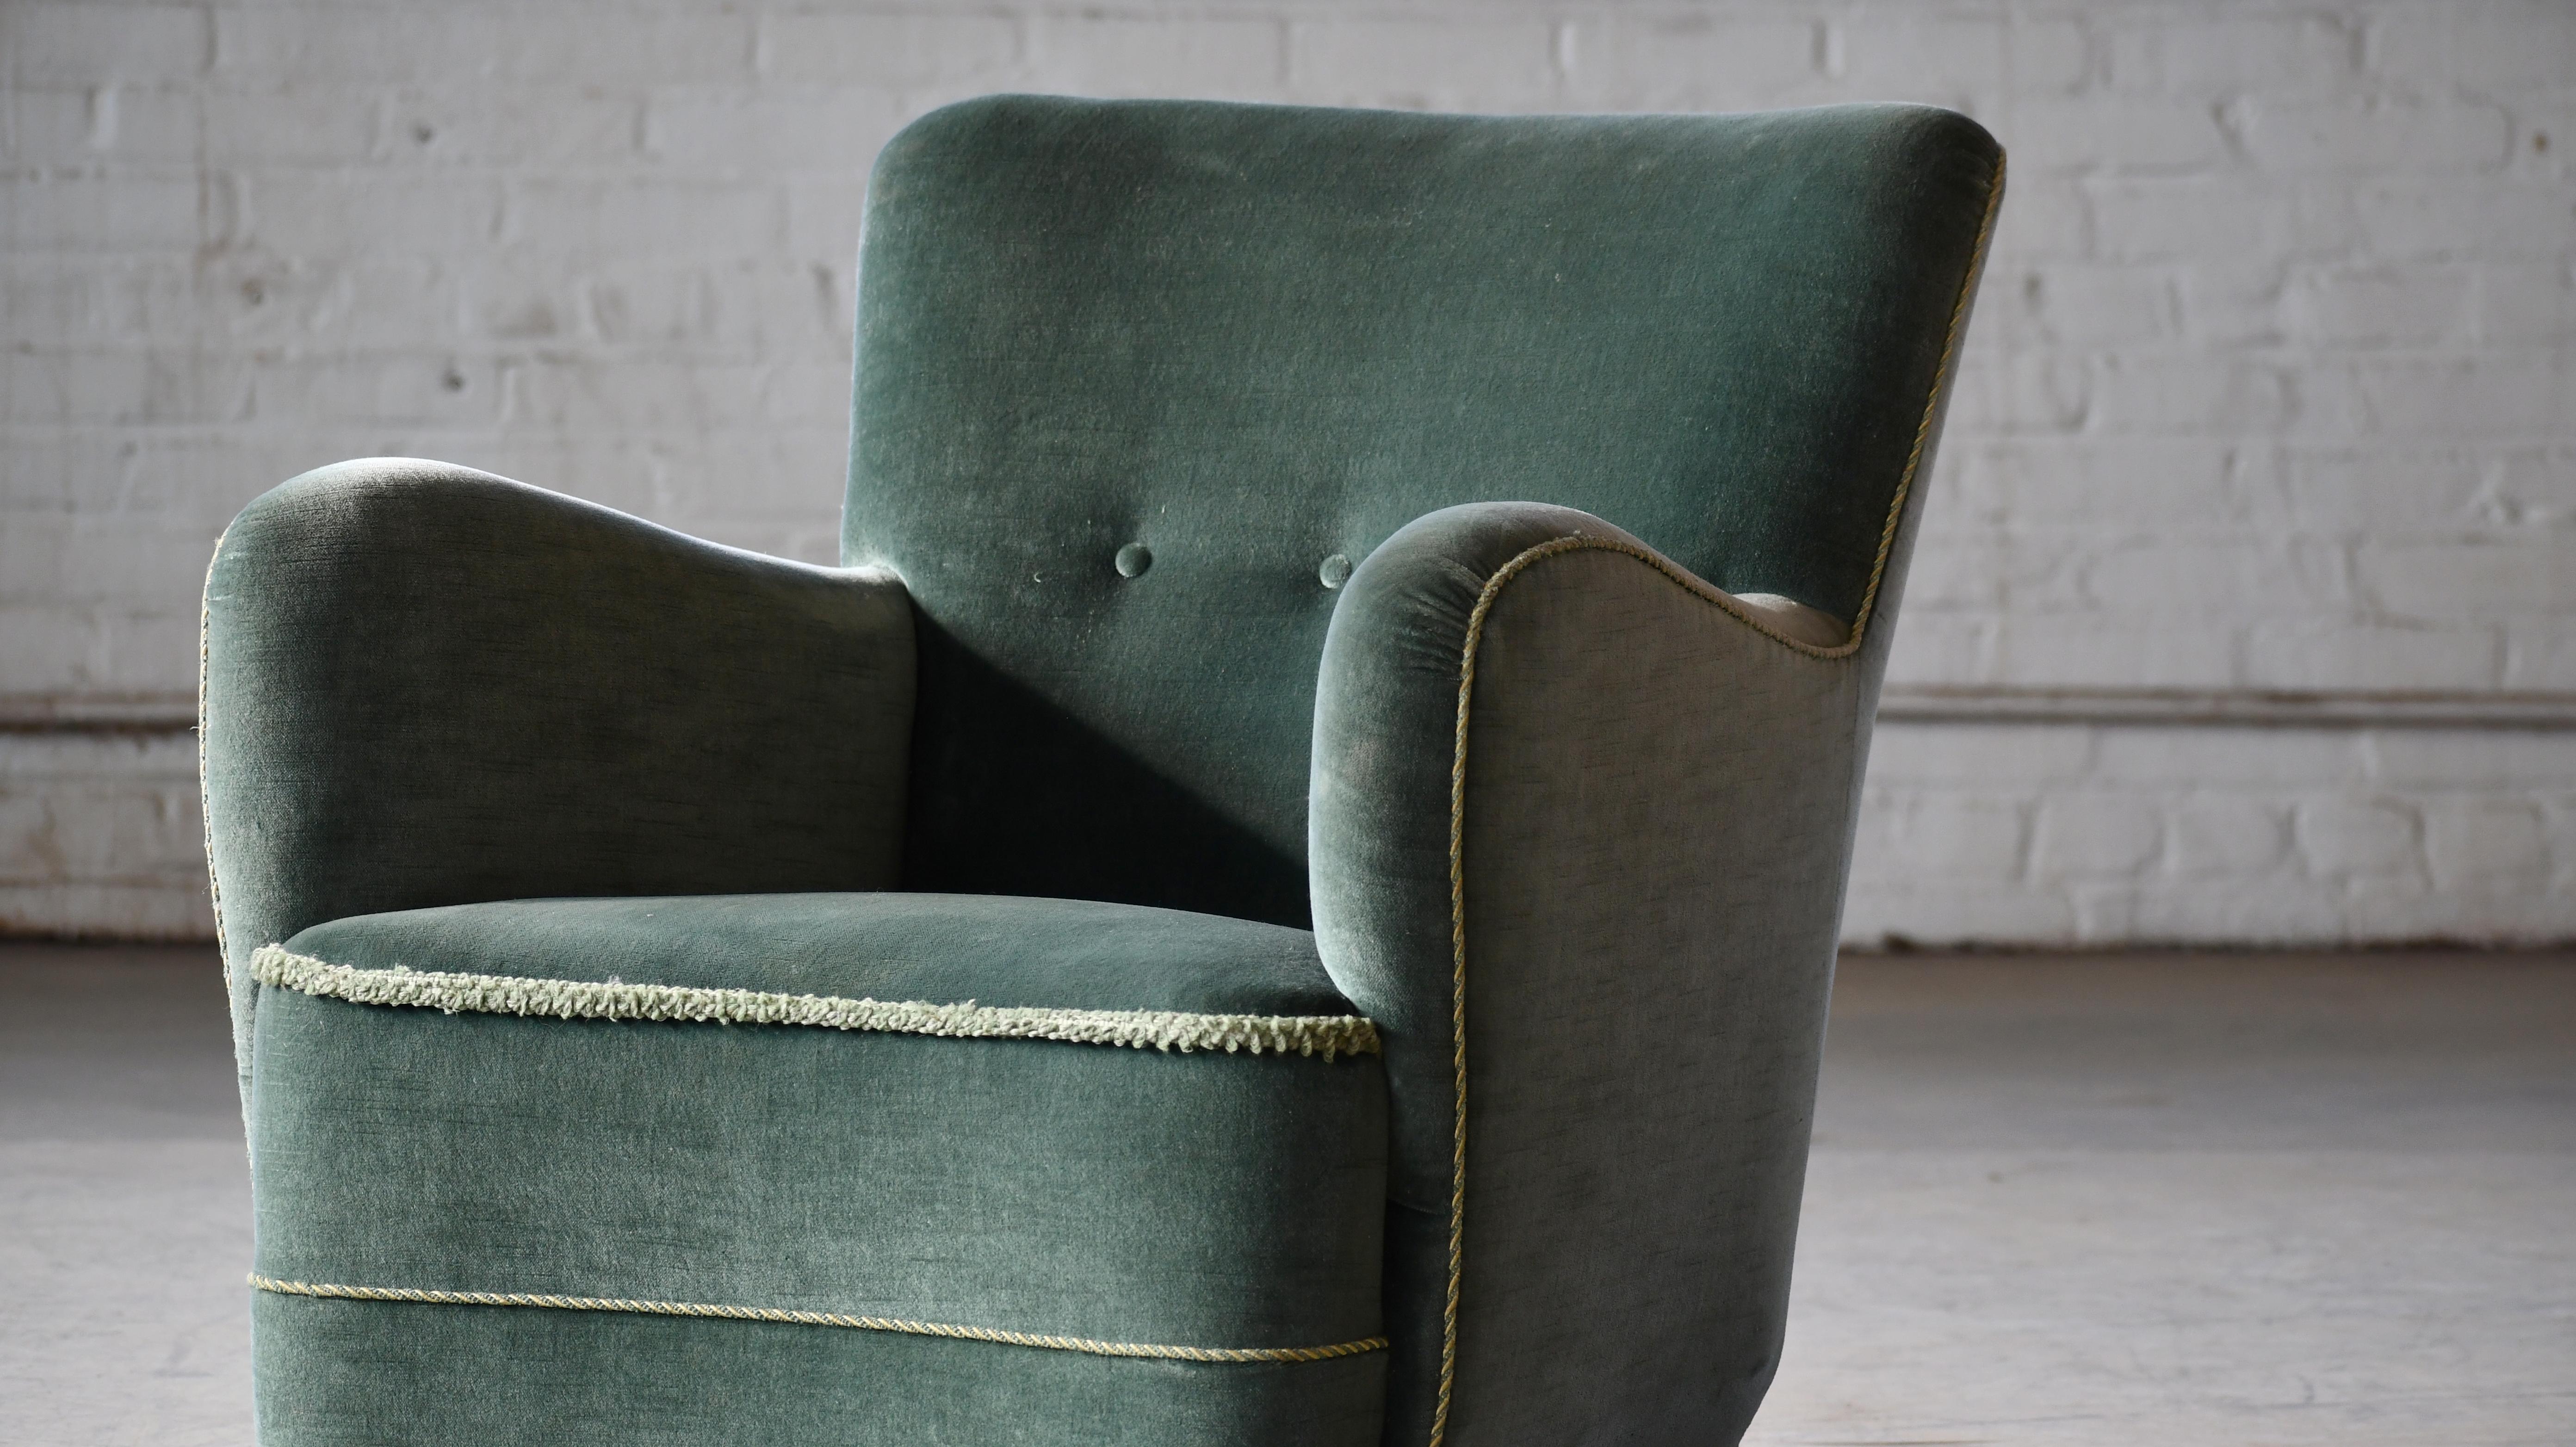 Mid-Century Modern Danish Art Deco or Early Midcentury Lounge Chair in Green Mohair 1930-40s